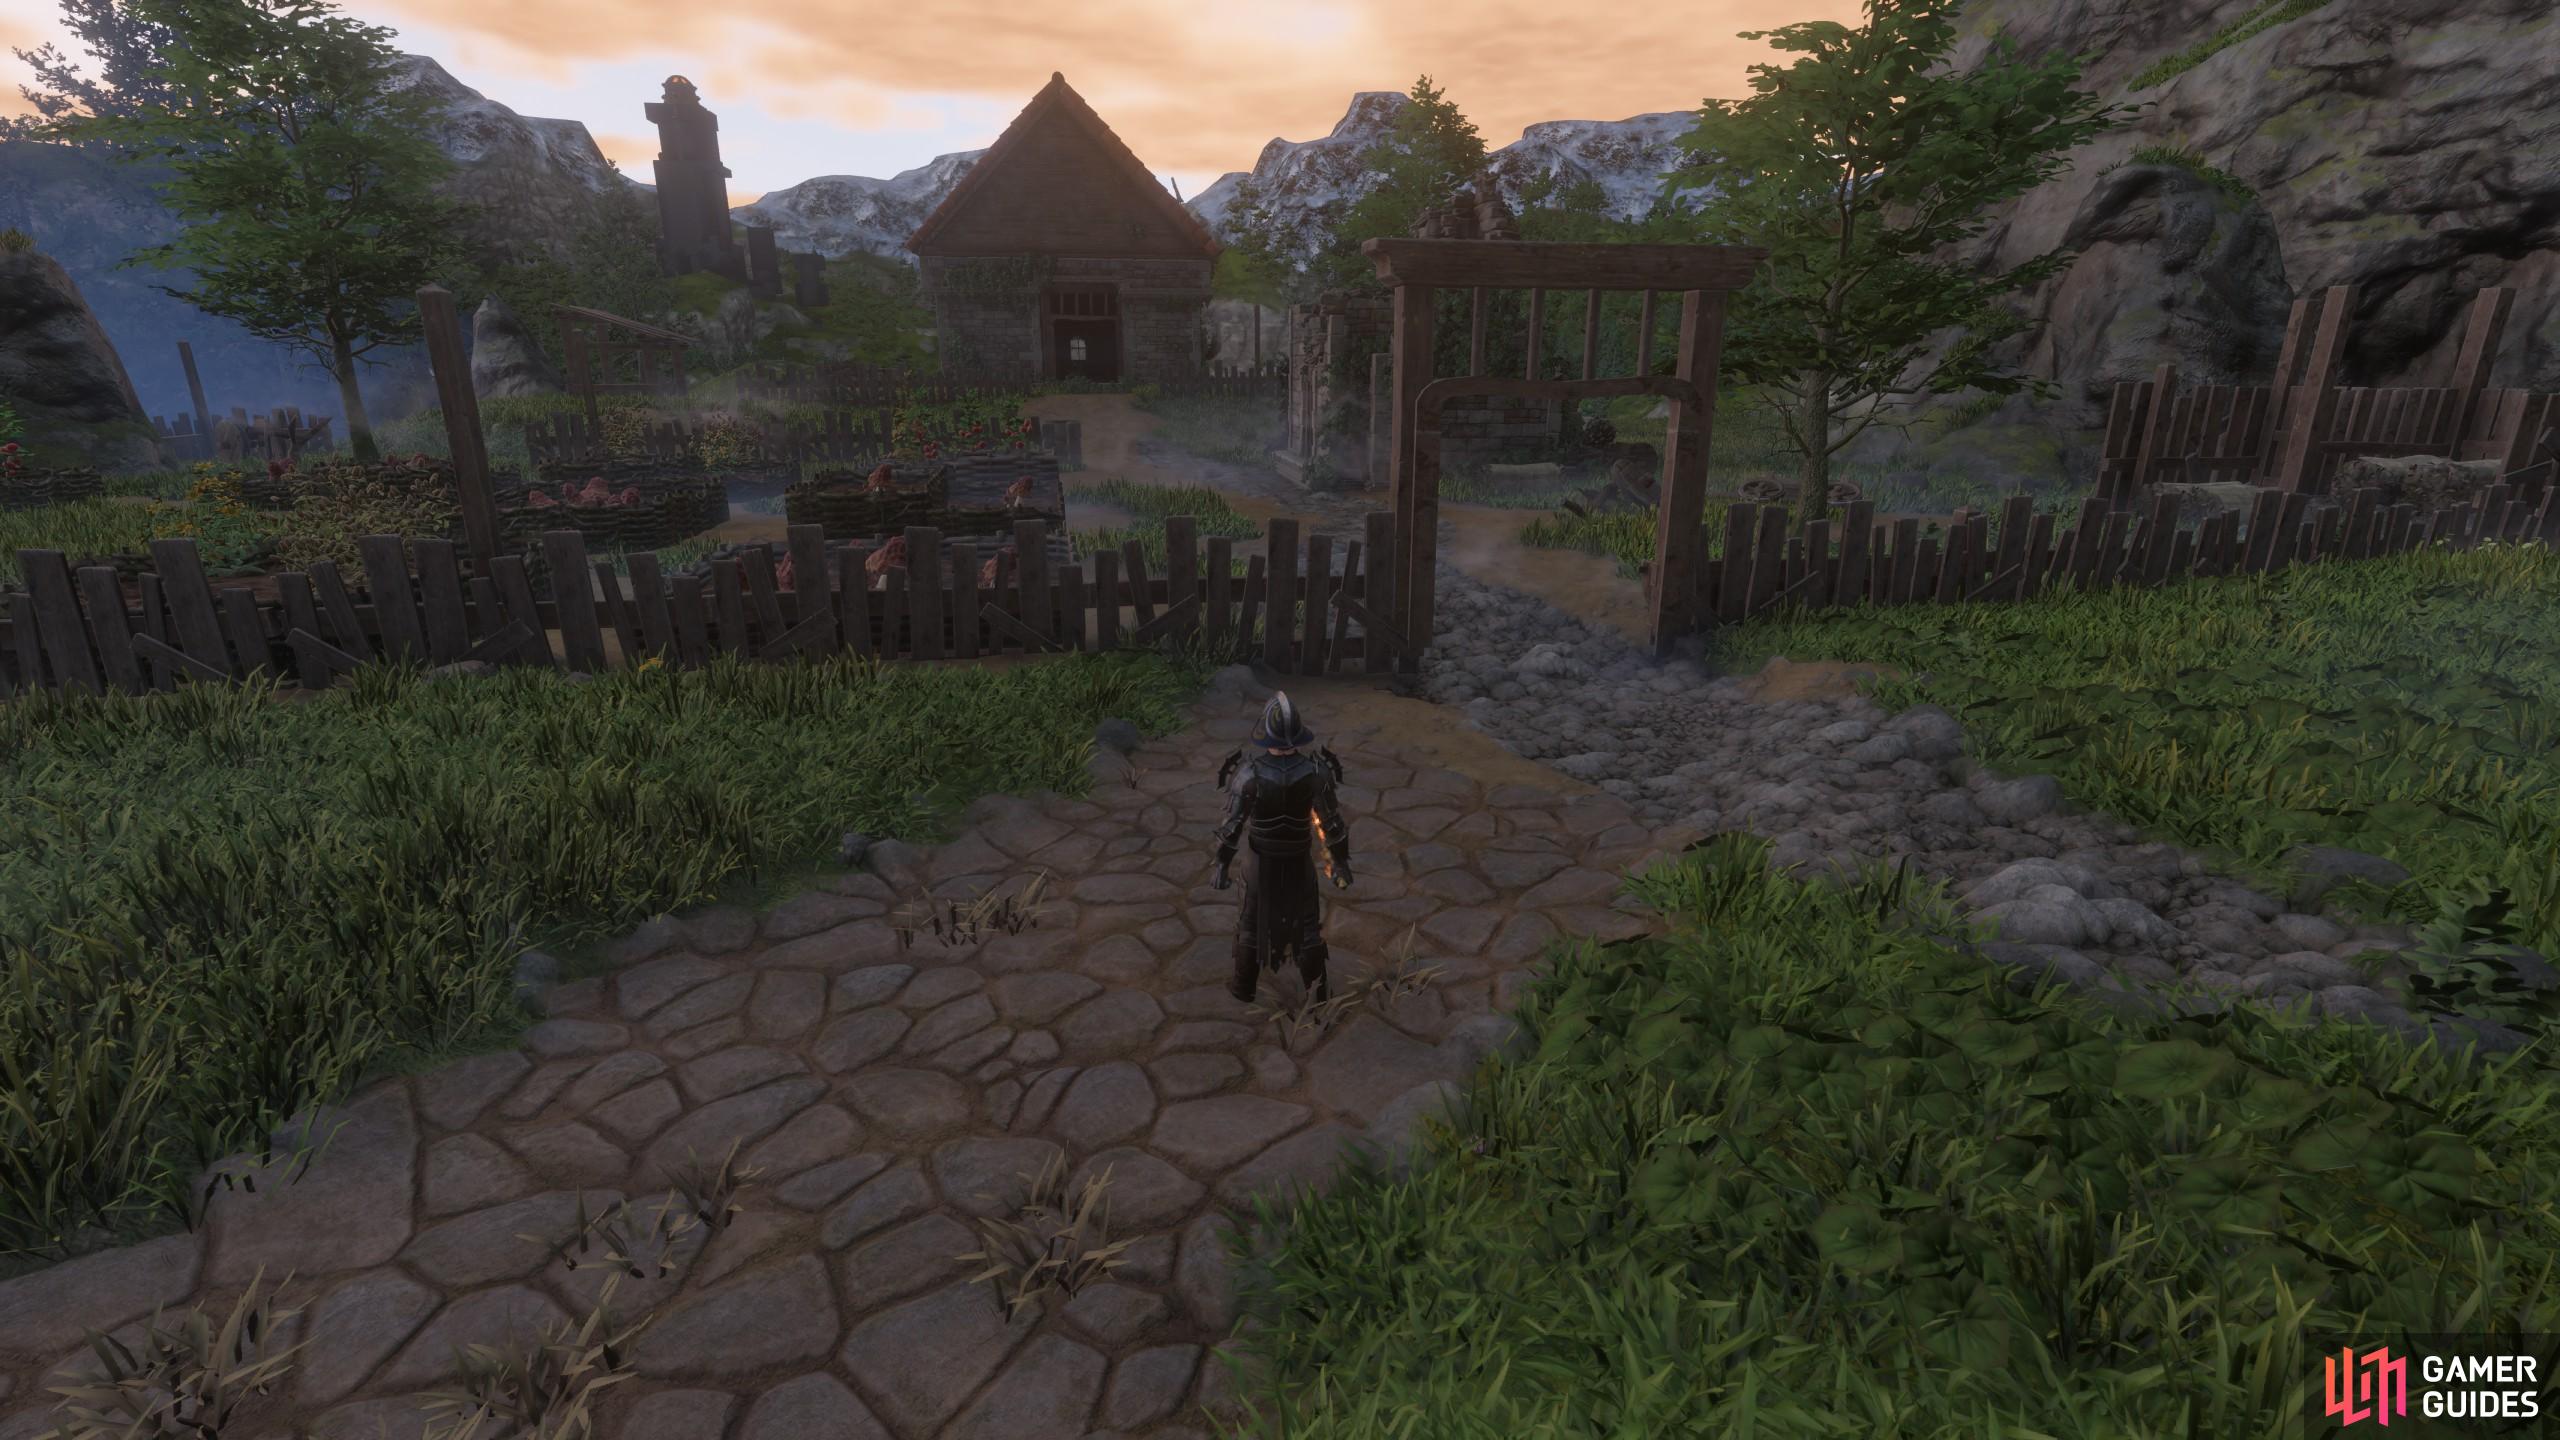 The Low Meadows is a mini Biome in Enshrouded, containing a few more Vaults and an introduction to some higher materials and enemies you encounter in Revelwood and Nomad Highlands.